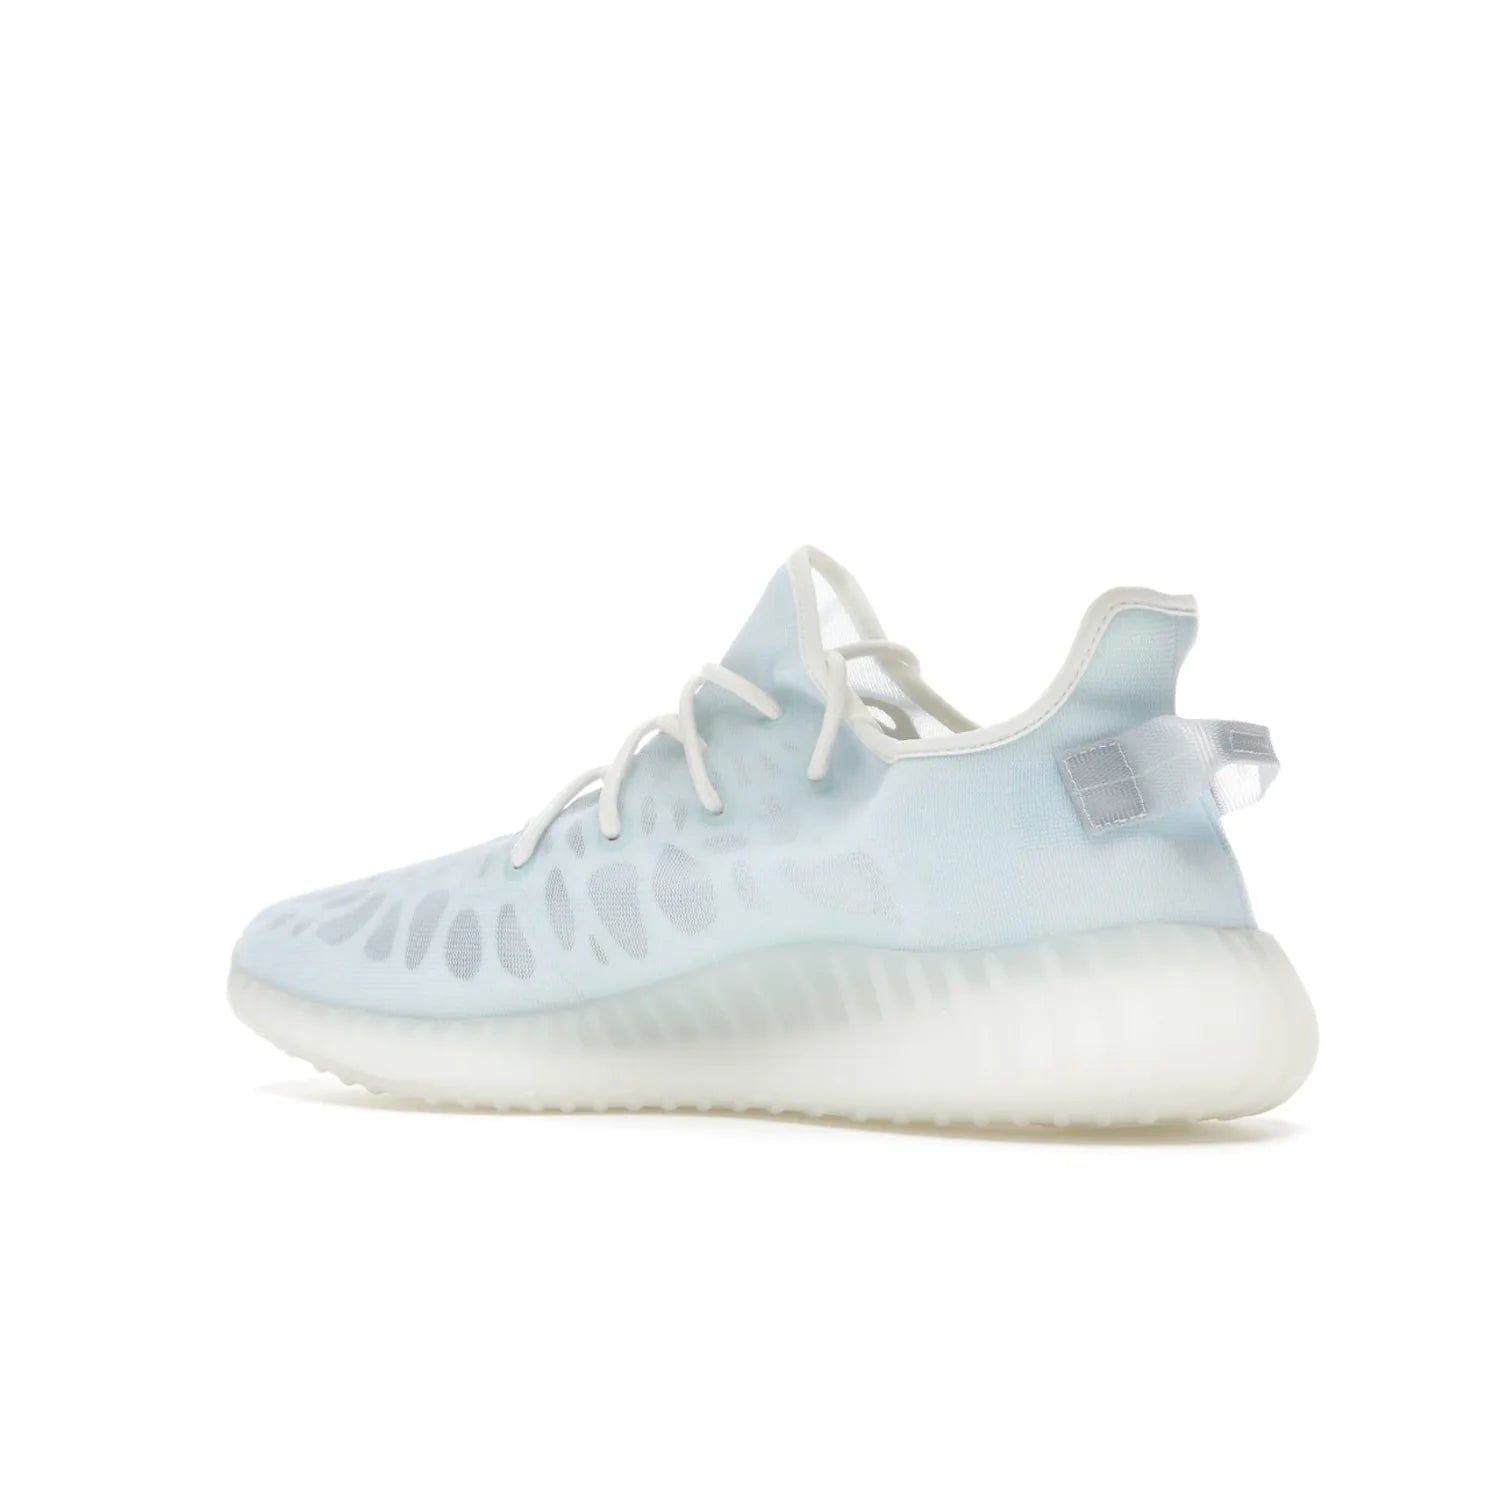 adidas Yeezy Boost 350 V2 Mono Ice - Image 22 - Only at www.BallersClubKickz.com - Introducing the adidas Yeezy 350 V2 Mono Ice - a sleek monofilament mesh design in Ice blue with Boost sole and heel pull tab. Released exclusively in the US for $220.